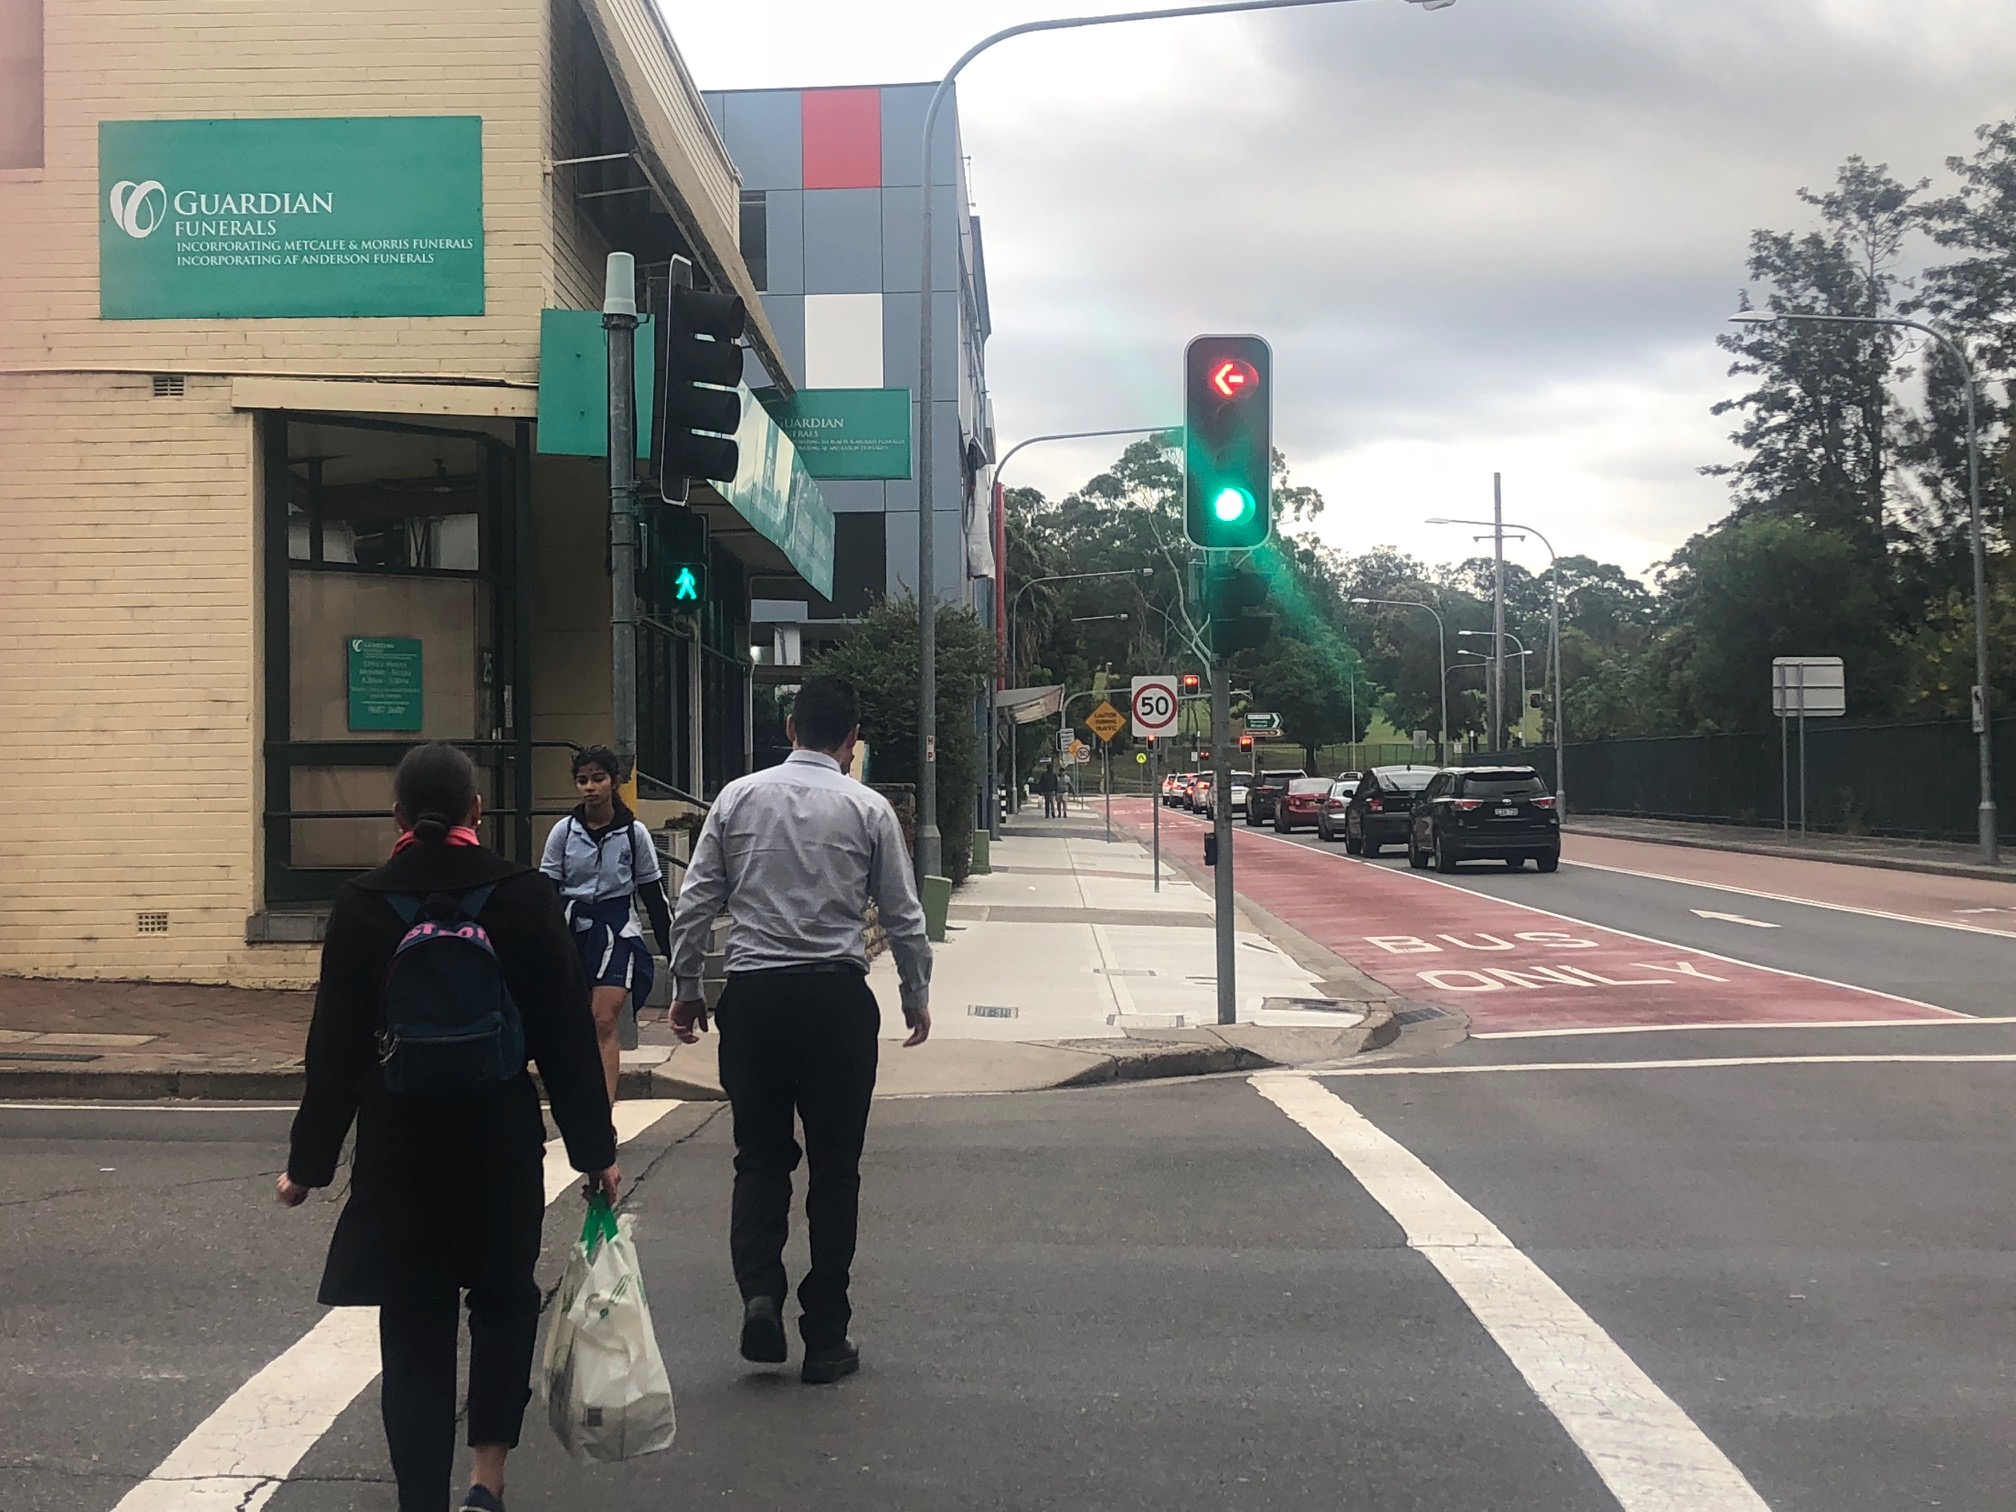 Pedestrian protection at signalised intersections